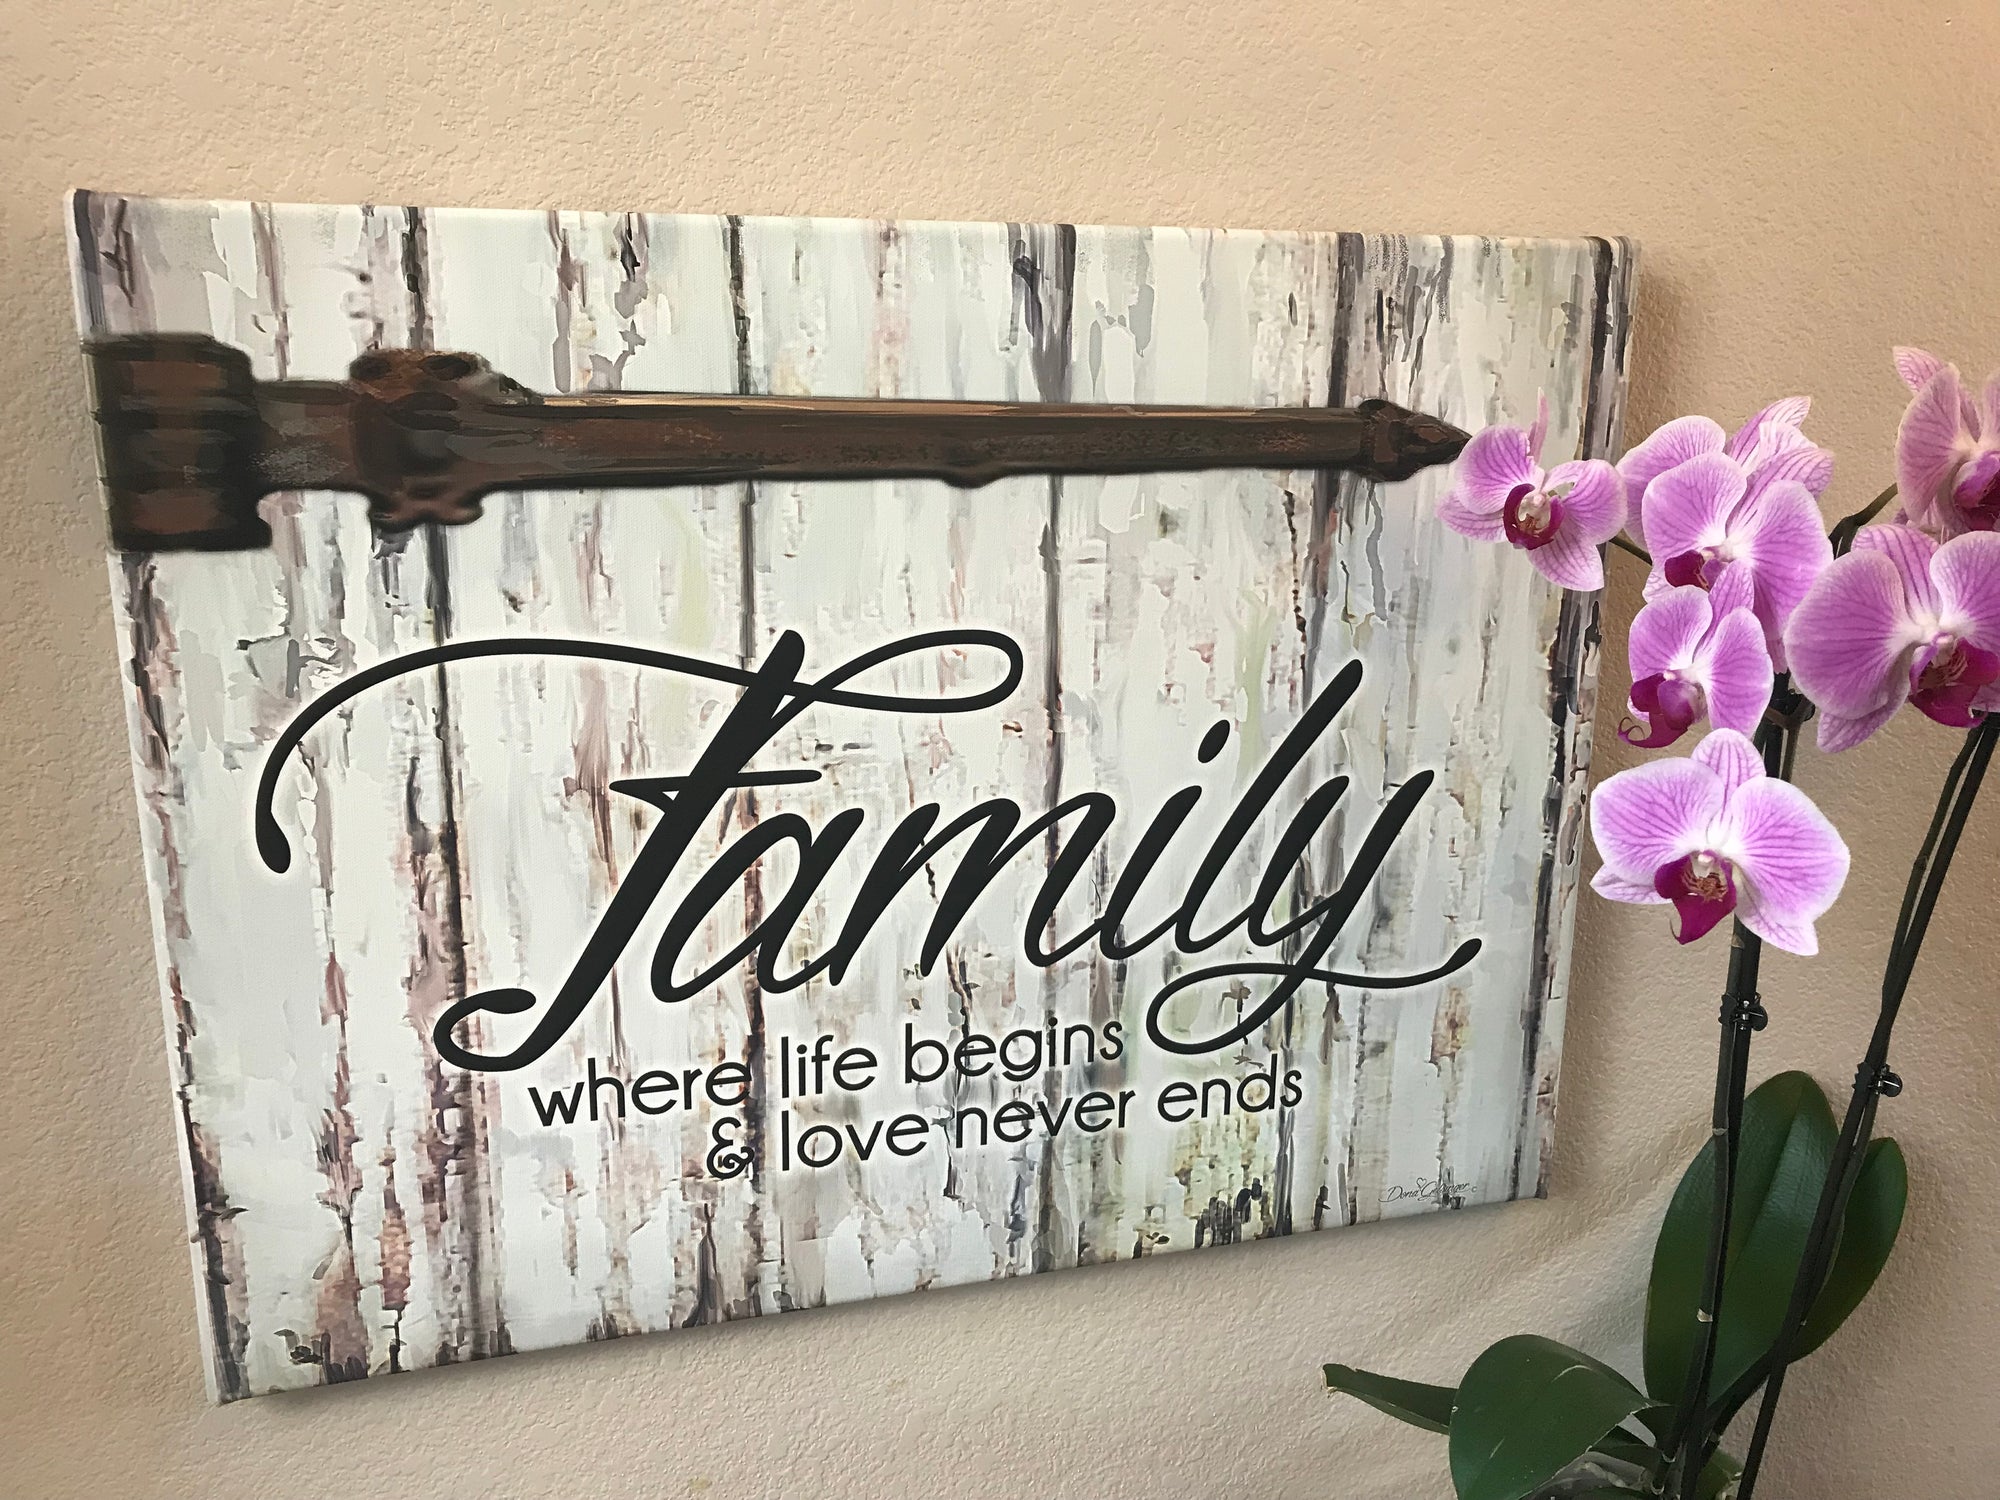 Featuring the heartwarming phrase "Family where life begins & love never ends" written in elegant script